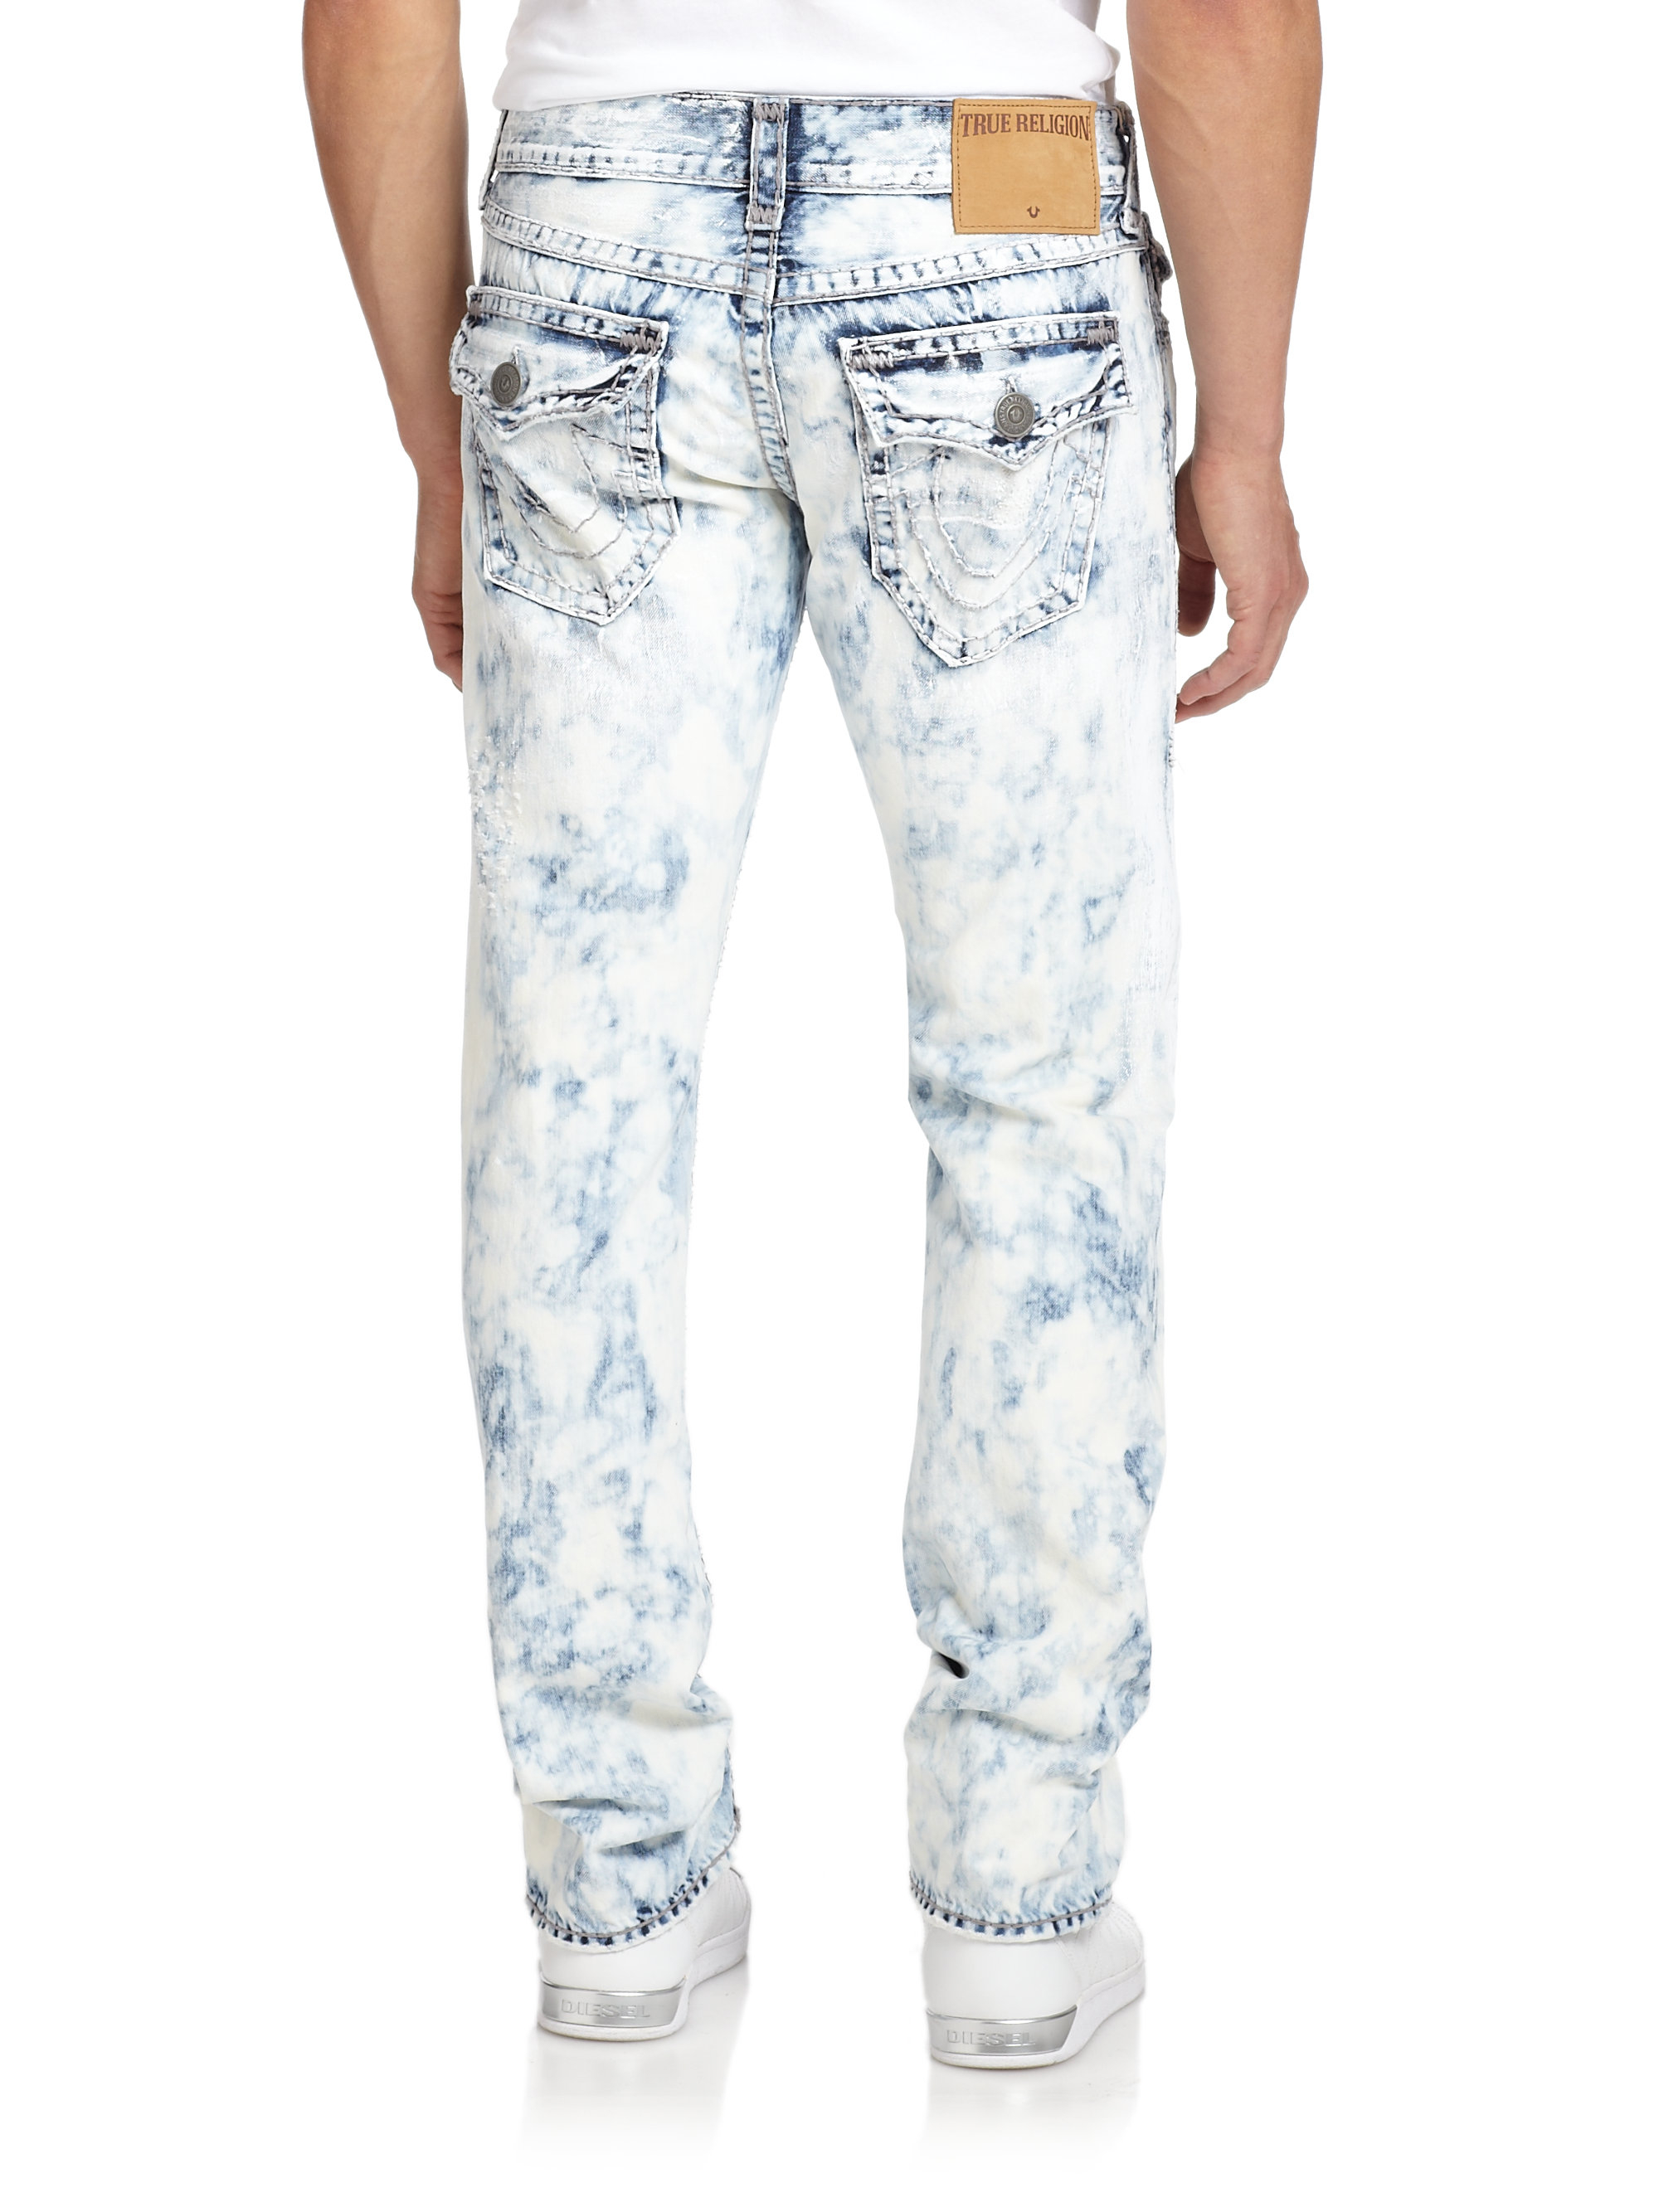 True Religion Mineral Wash Ricky Washed Straight Leg Jeans Product 0 227533520 Normal 